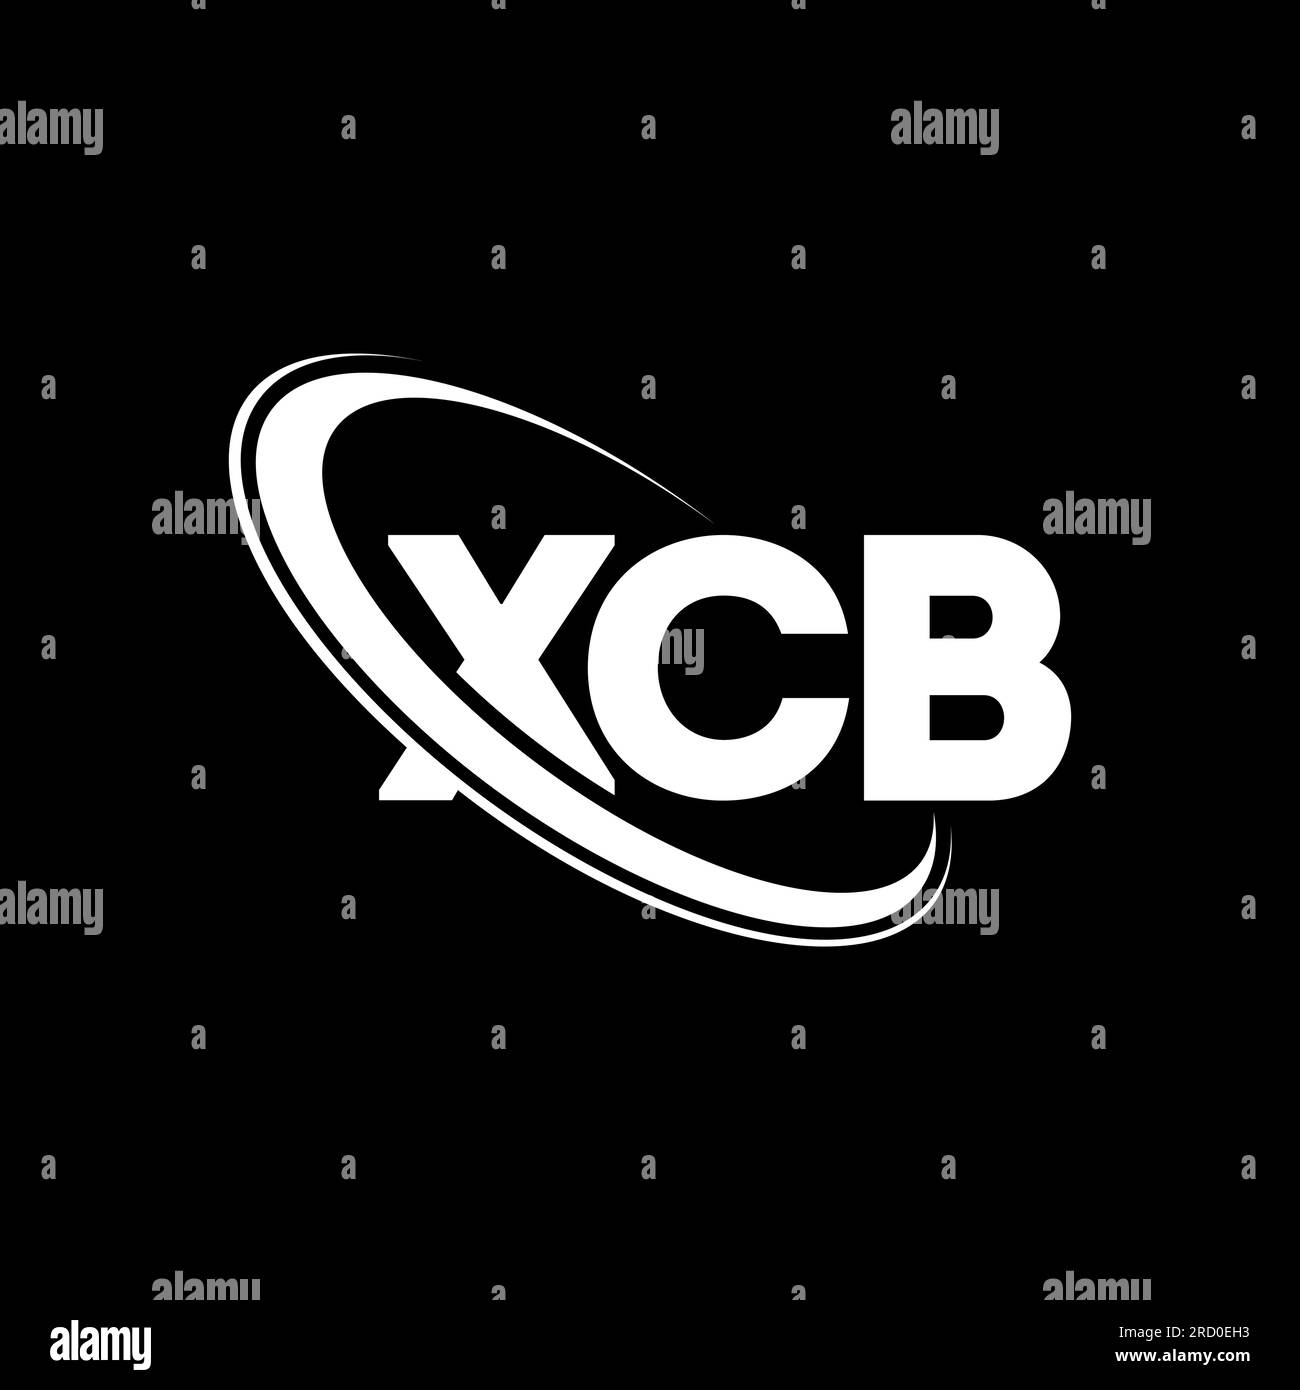 XCB logo. XCB letter. XCB letter logo design. Initials XCB logo linked with circle and uppercase monogram logo. XCB typography for technology, busines Stock Vector